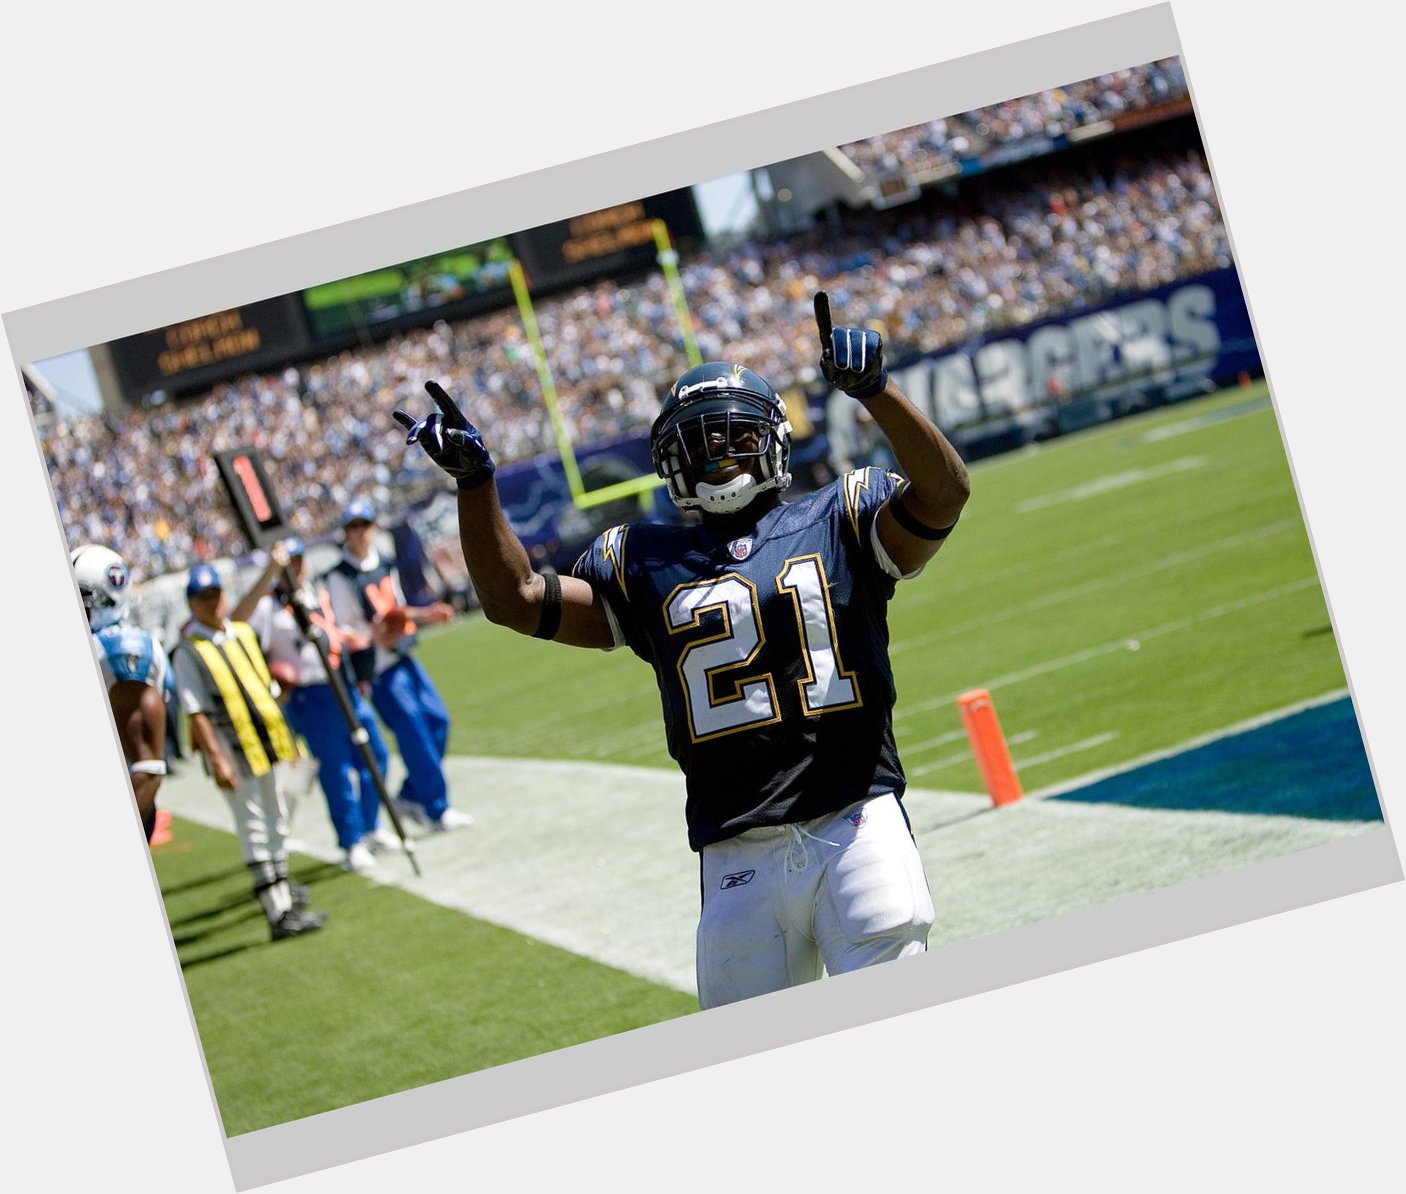 Join us in wishing legend and RB LaDainian Tomlinson a happy 38th birthday!  